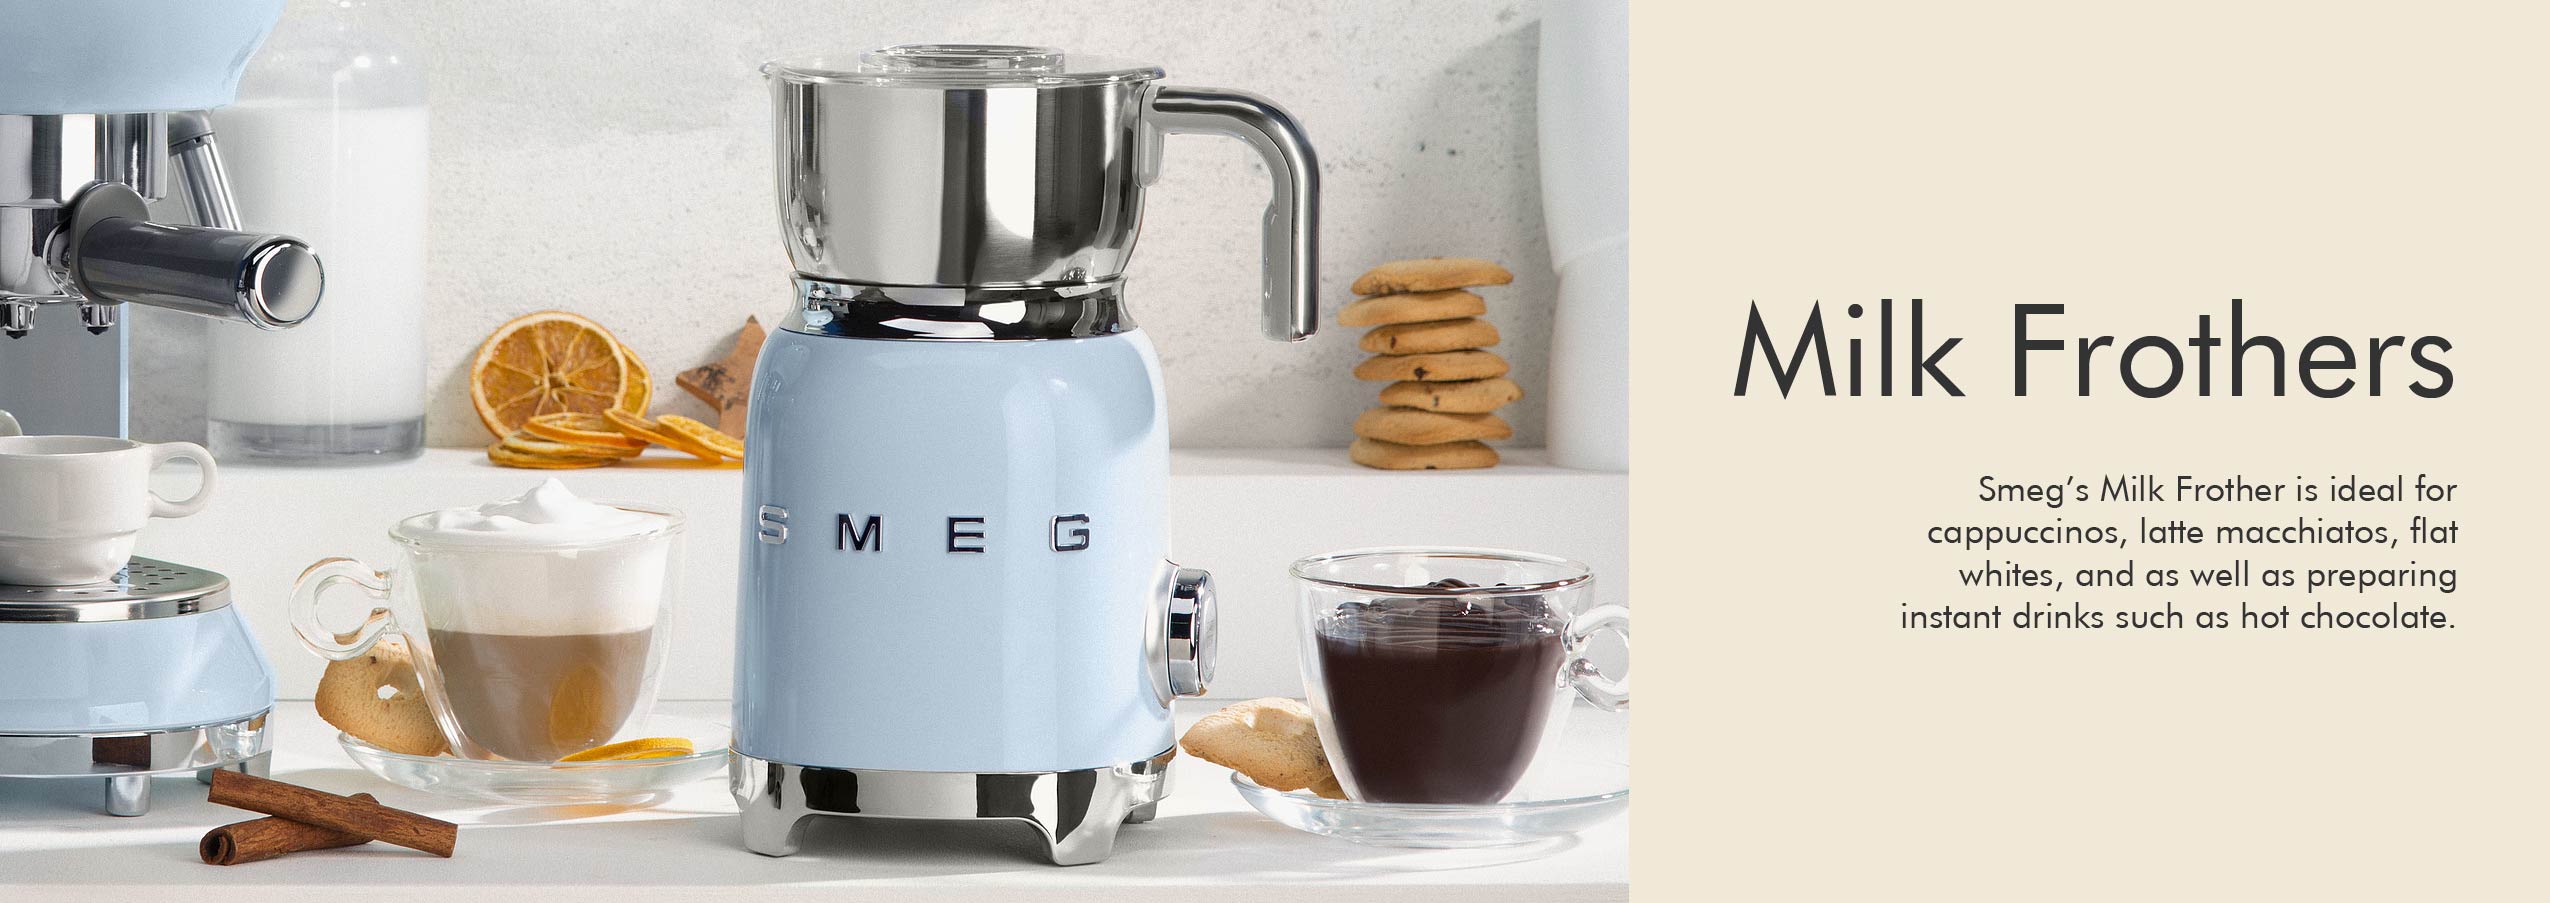 Smeg MFF01 Electric Milk Frother - Crema